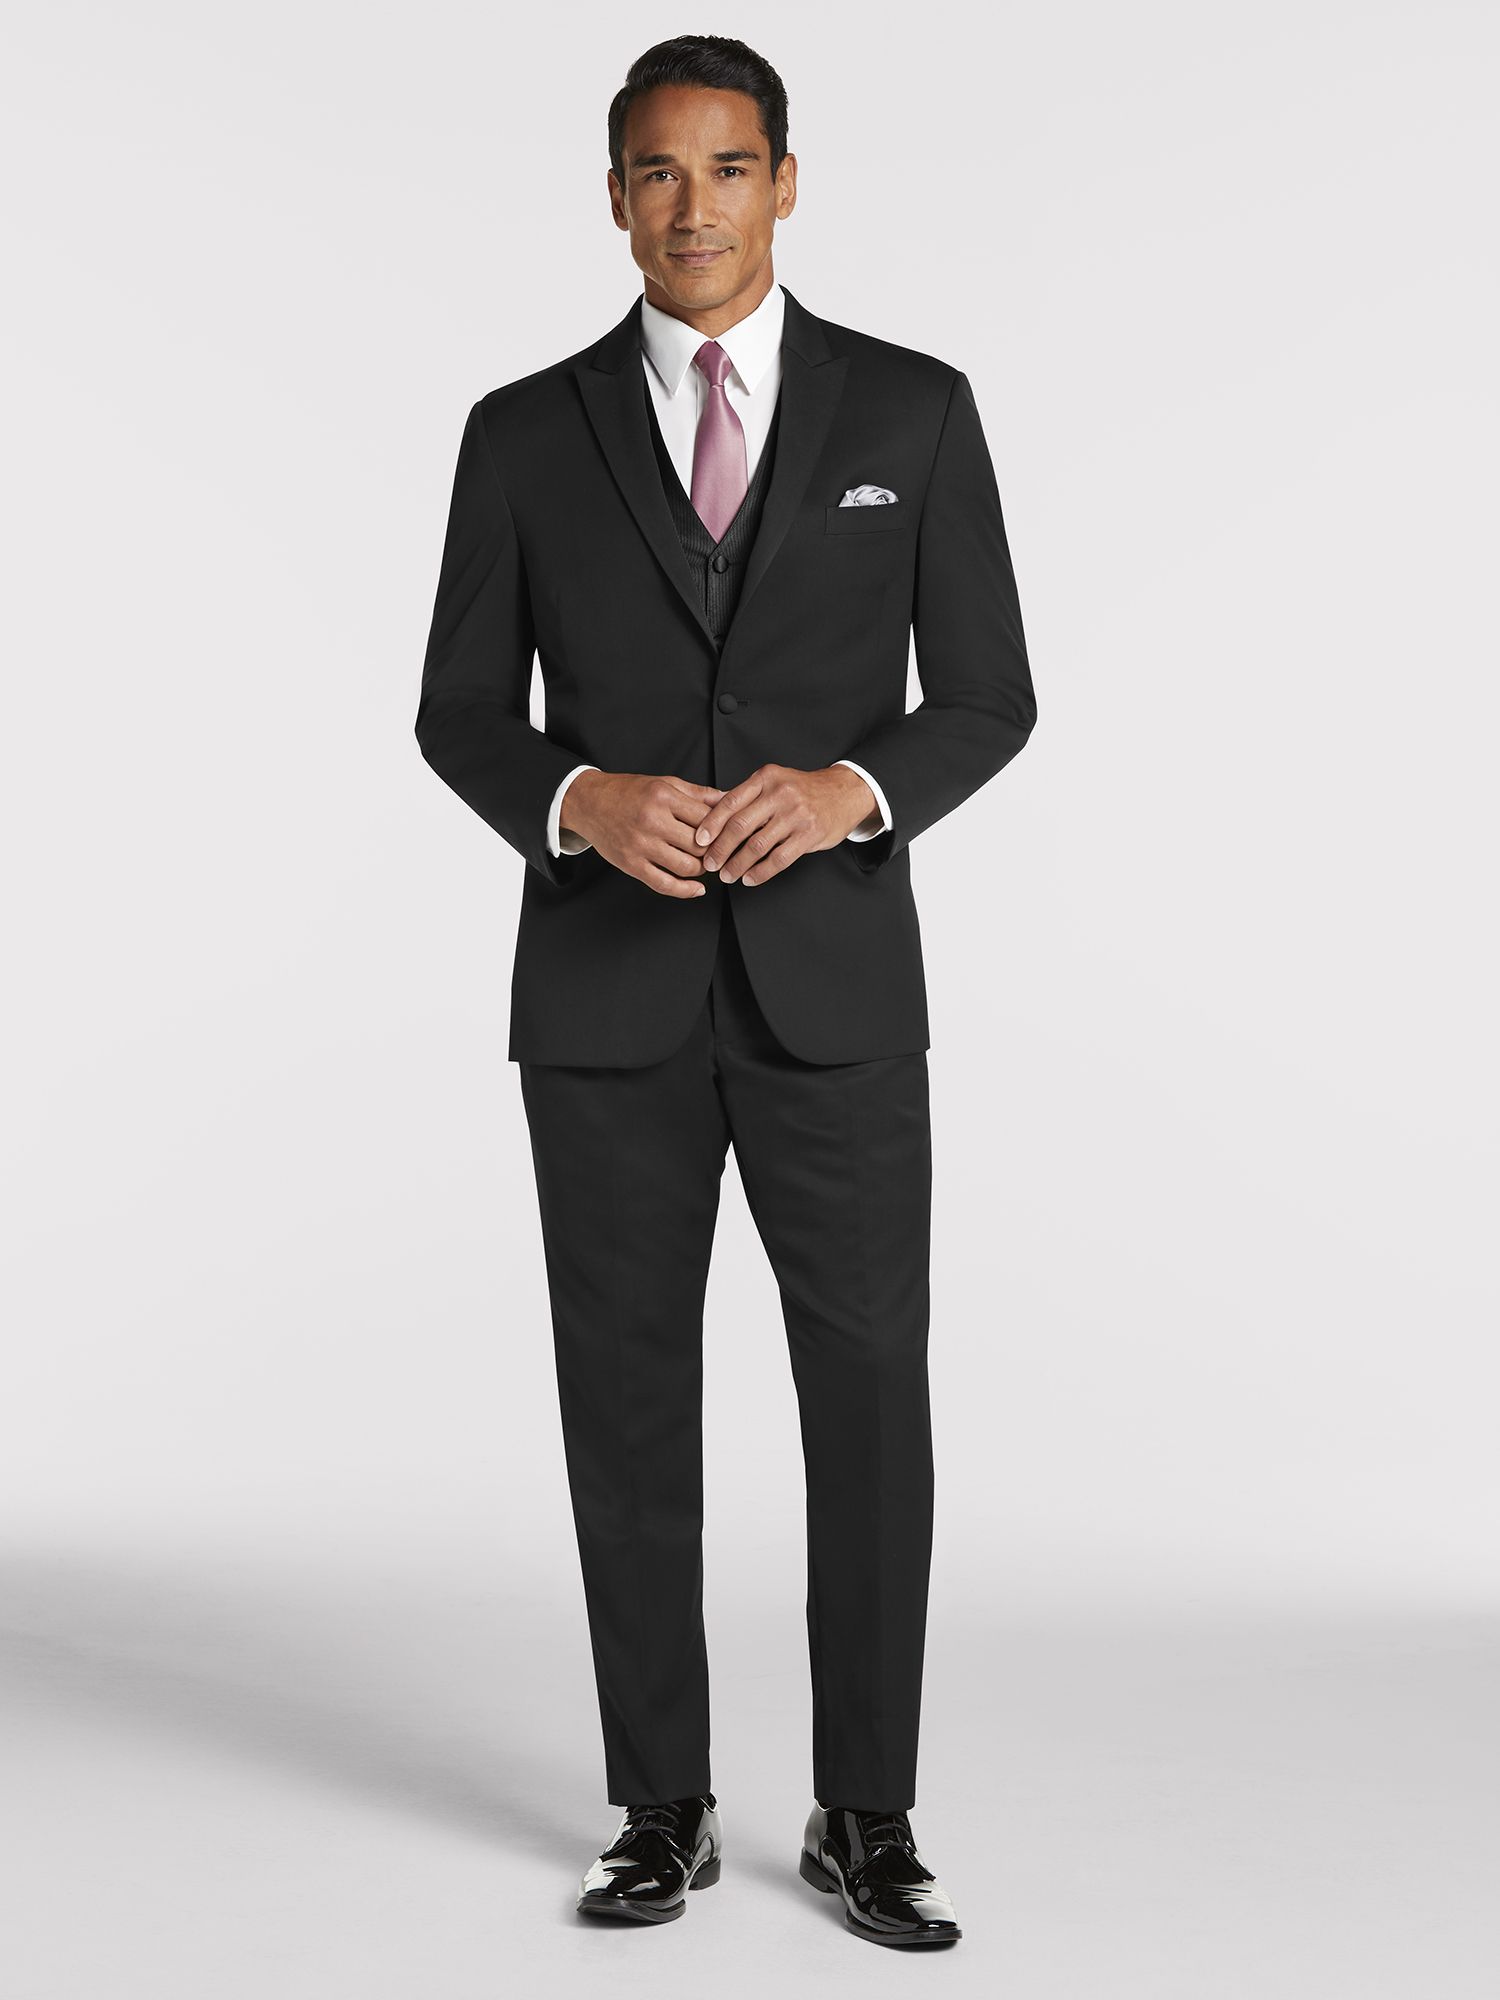 Pre-Styled Tuxedos for Special Occasions & Formal Events | Men's Wearhouse